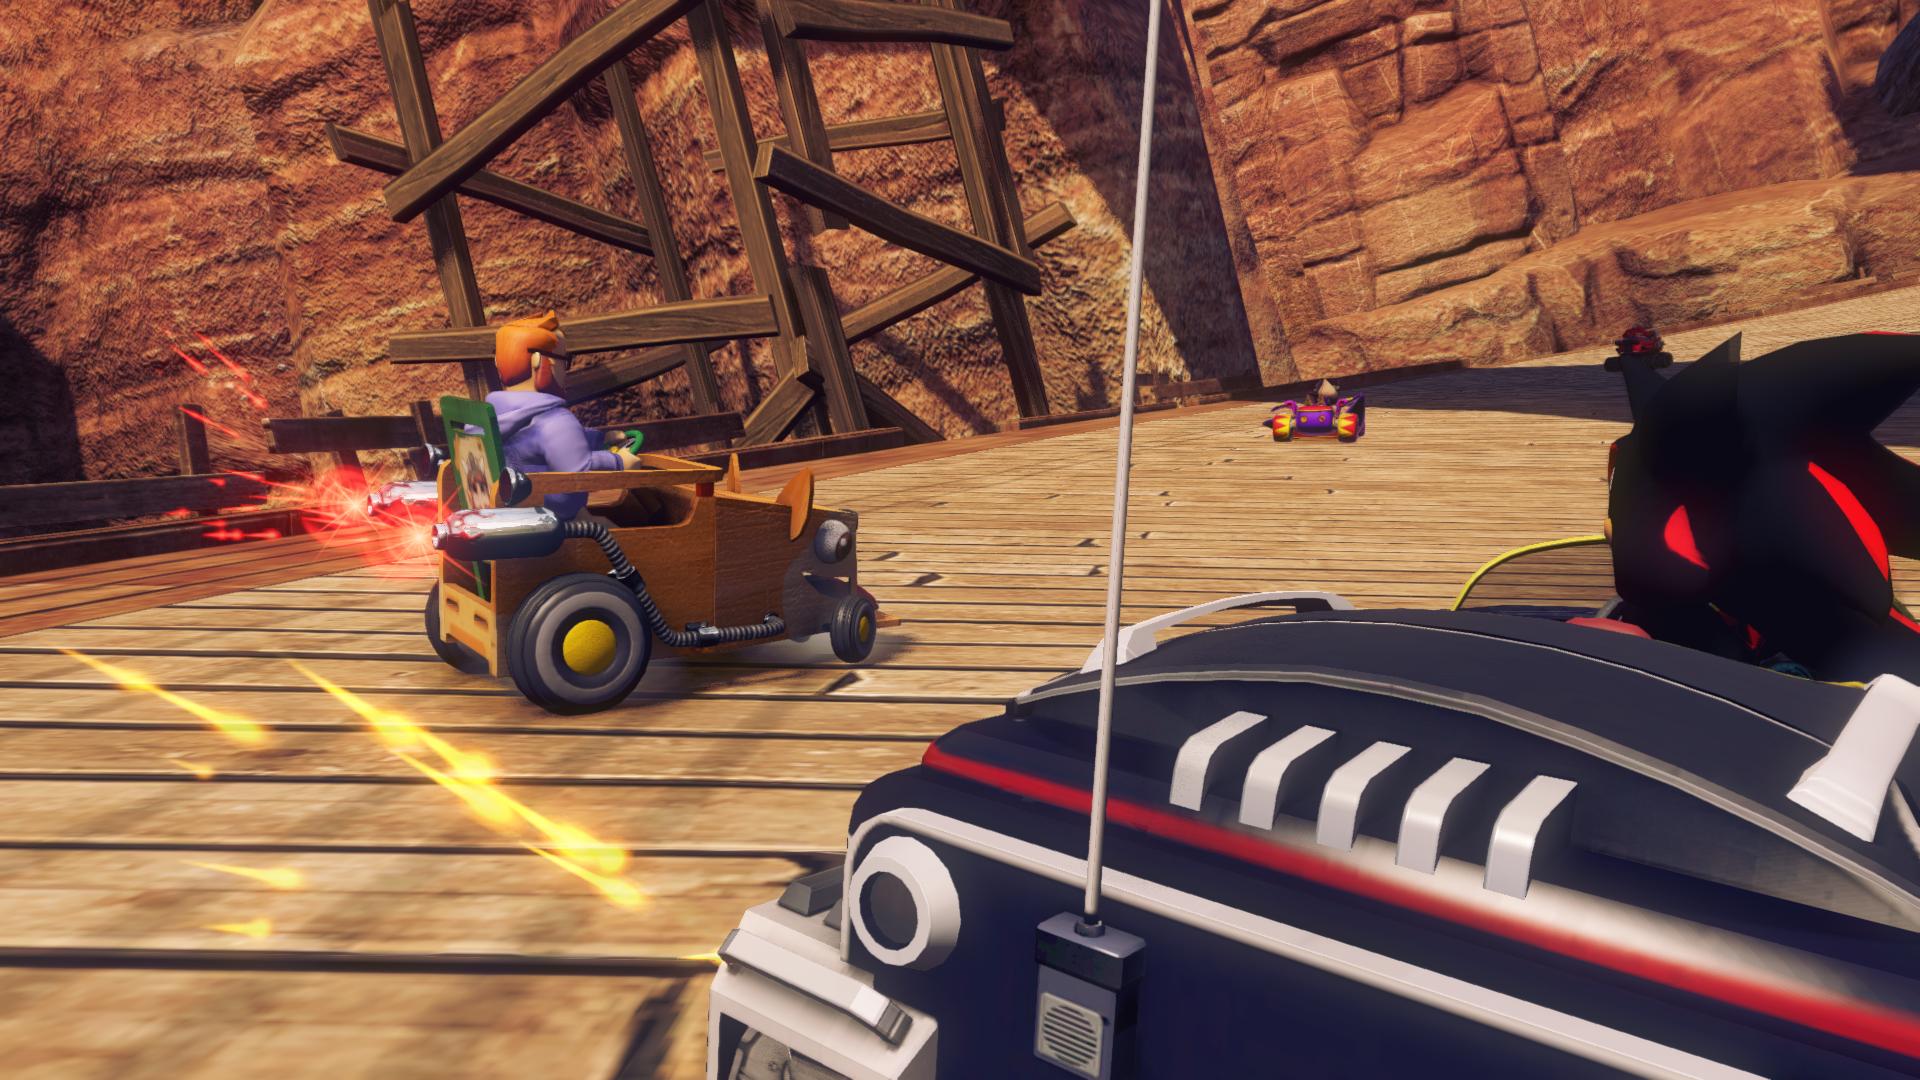 Sonic and All-Stars Racing Transformed - Yogscast DLC Steam Gift, 51.92$